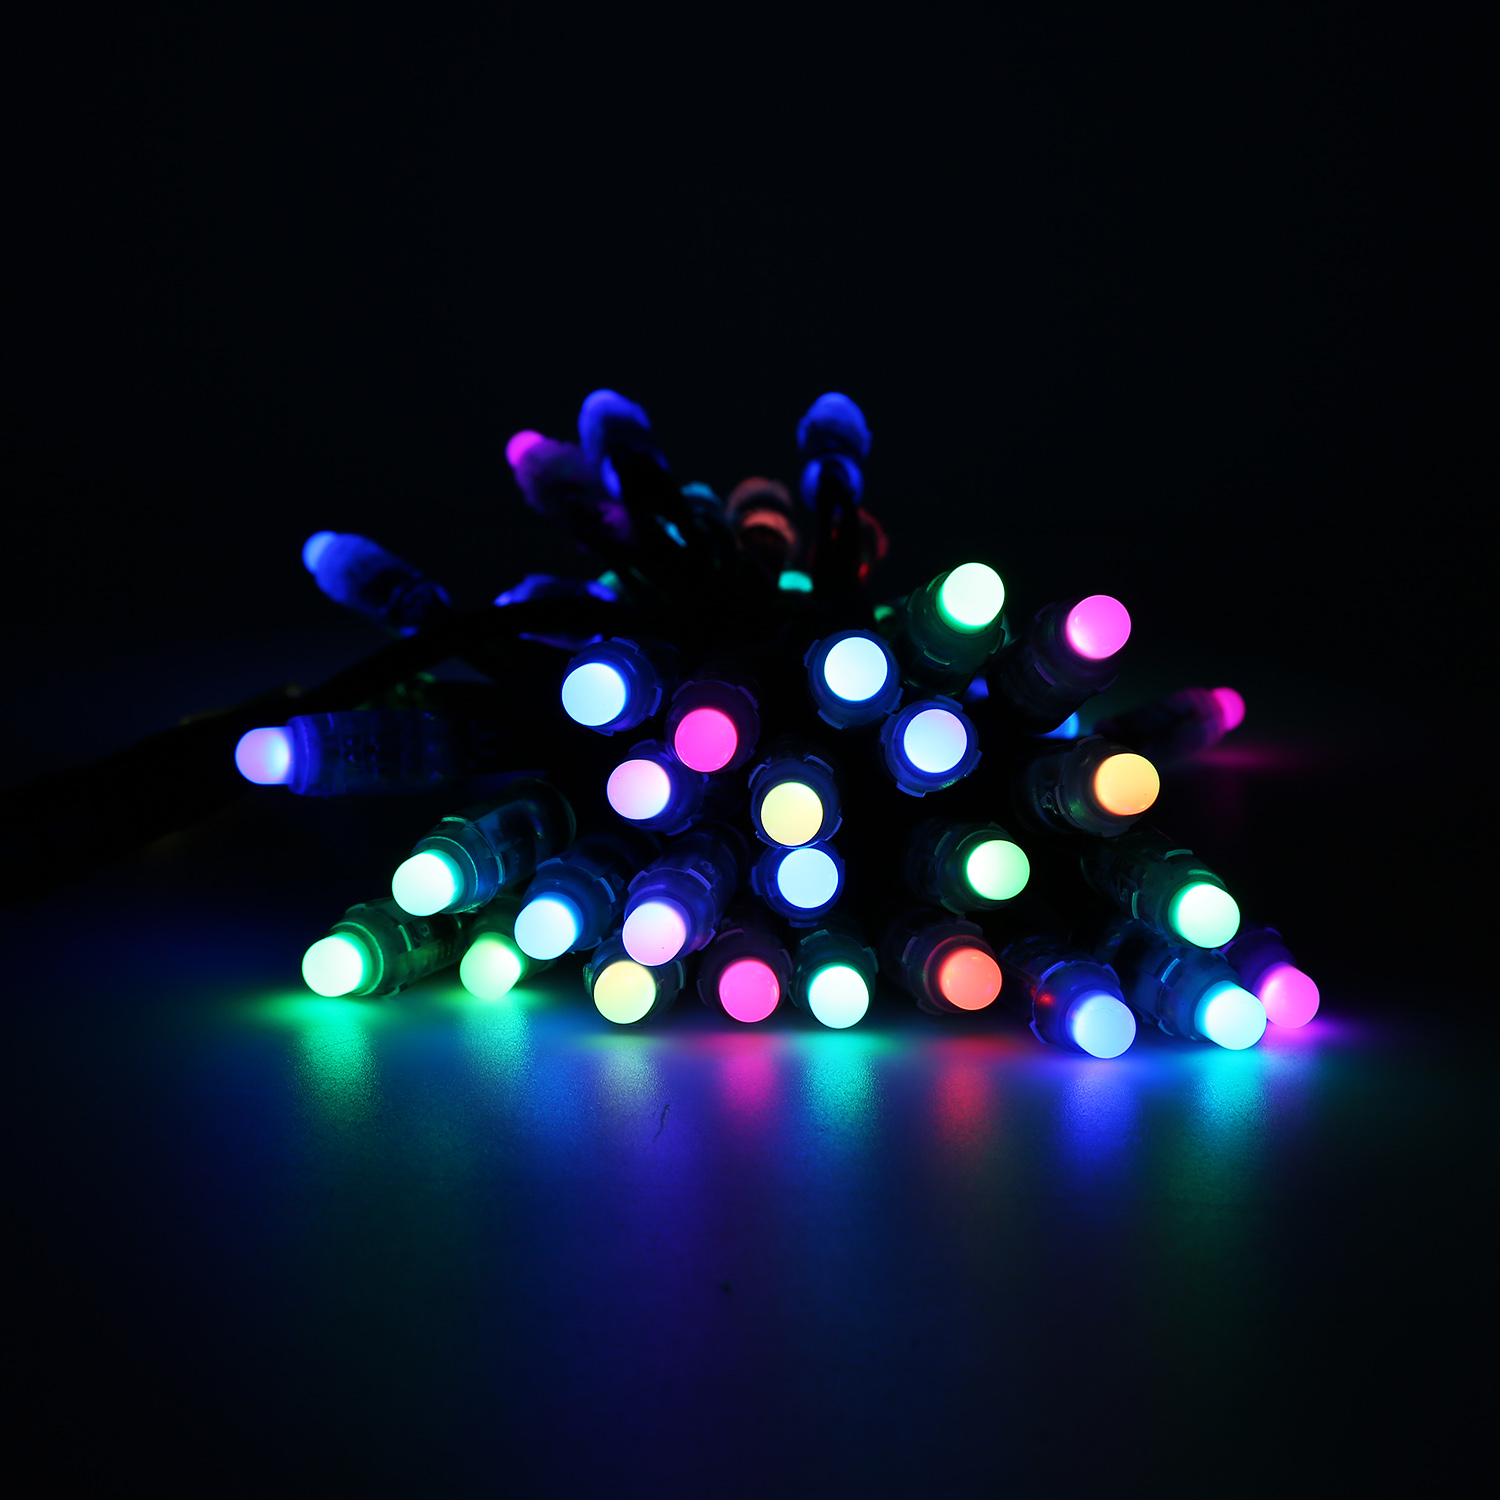 What is the use of RGB LED pixel light?